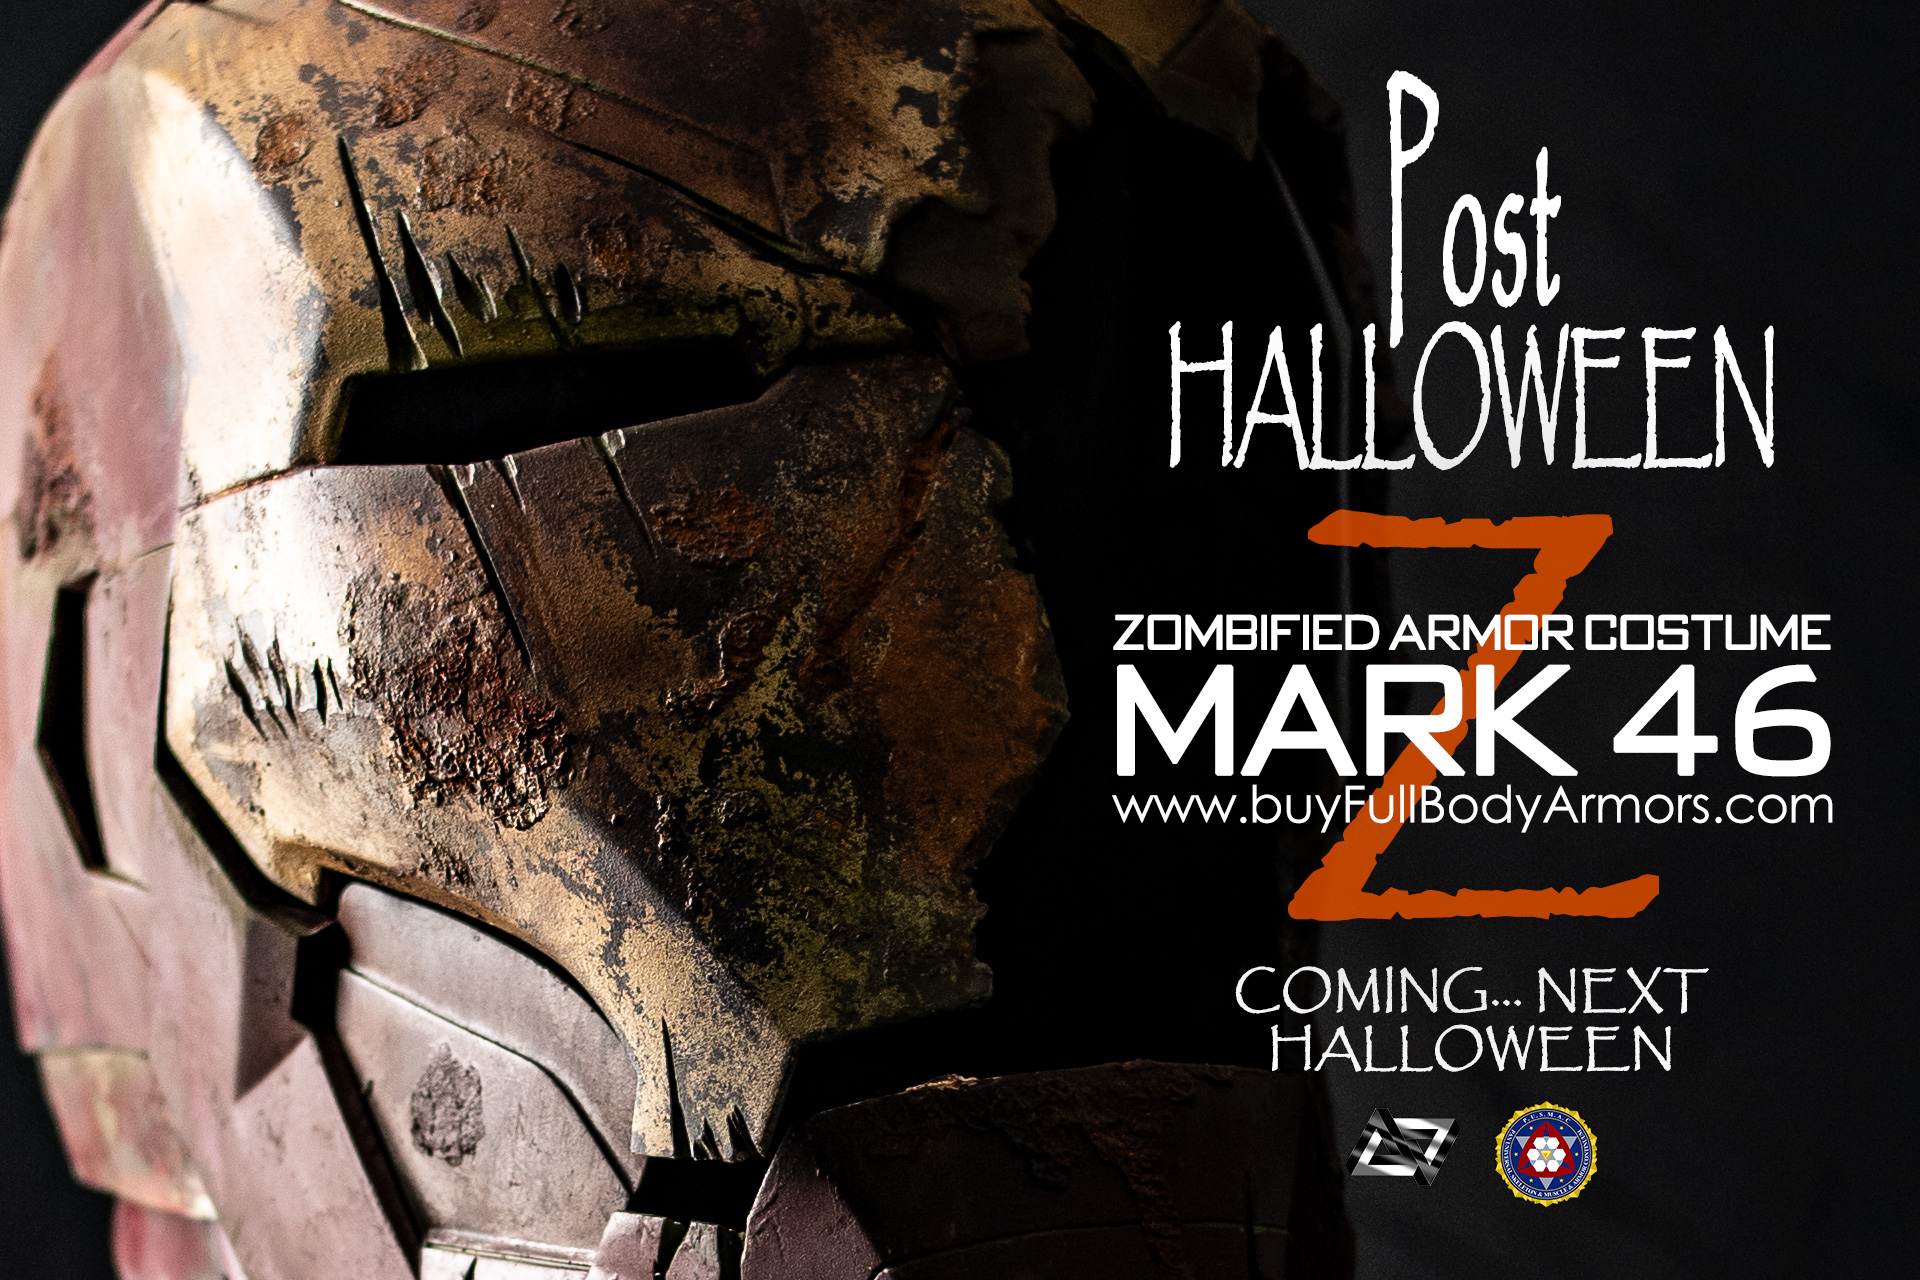 the zombified Iron Man Mark 46 Z Armor Costume Suit - the Leading Actor of Our Post Halloween Mini-Movie